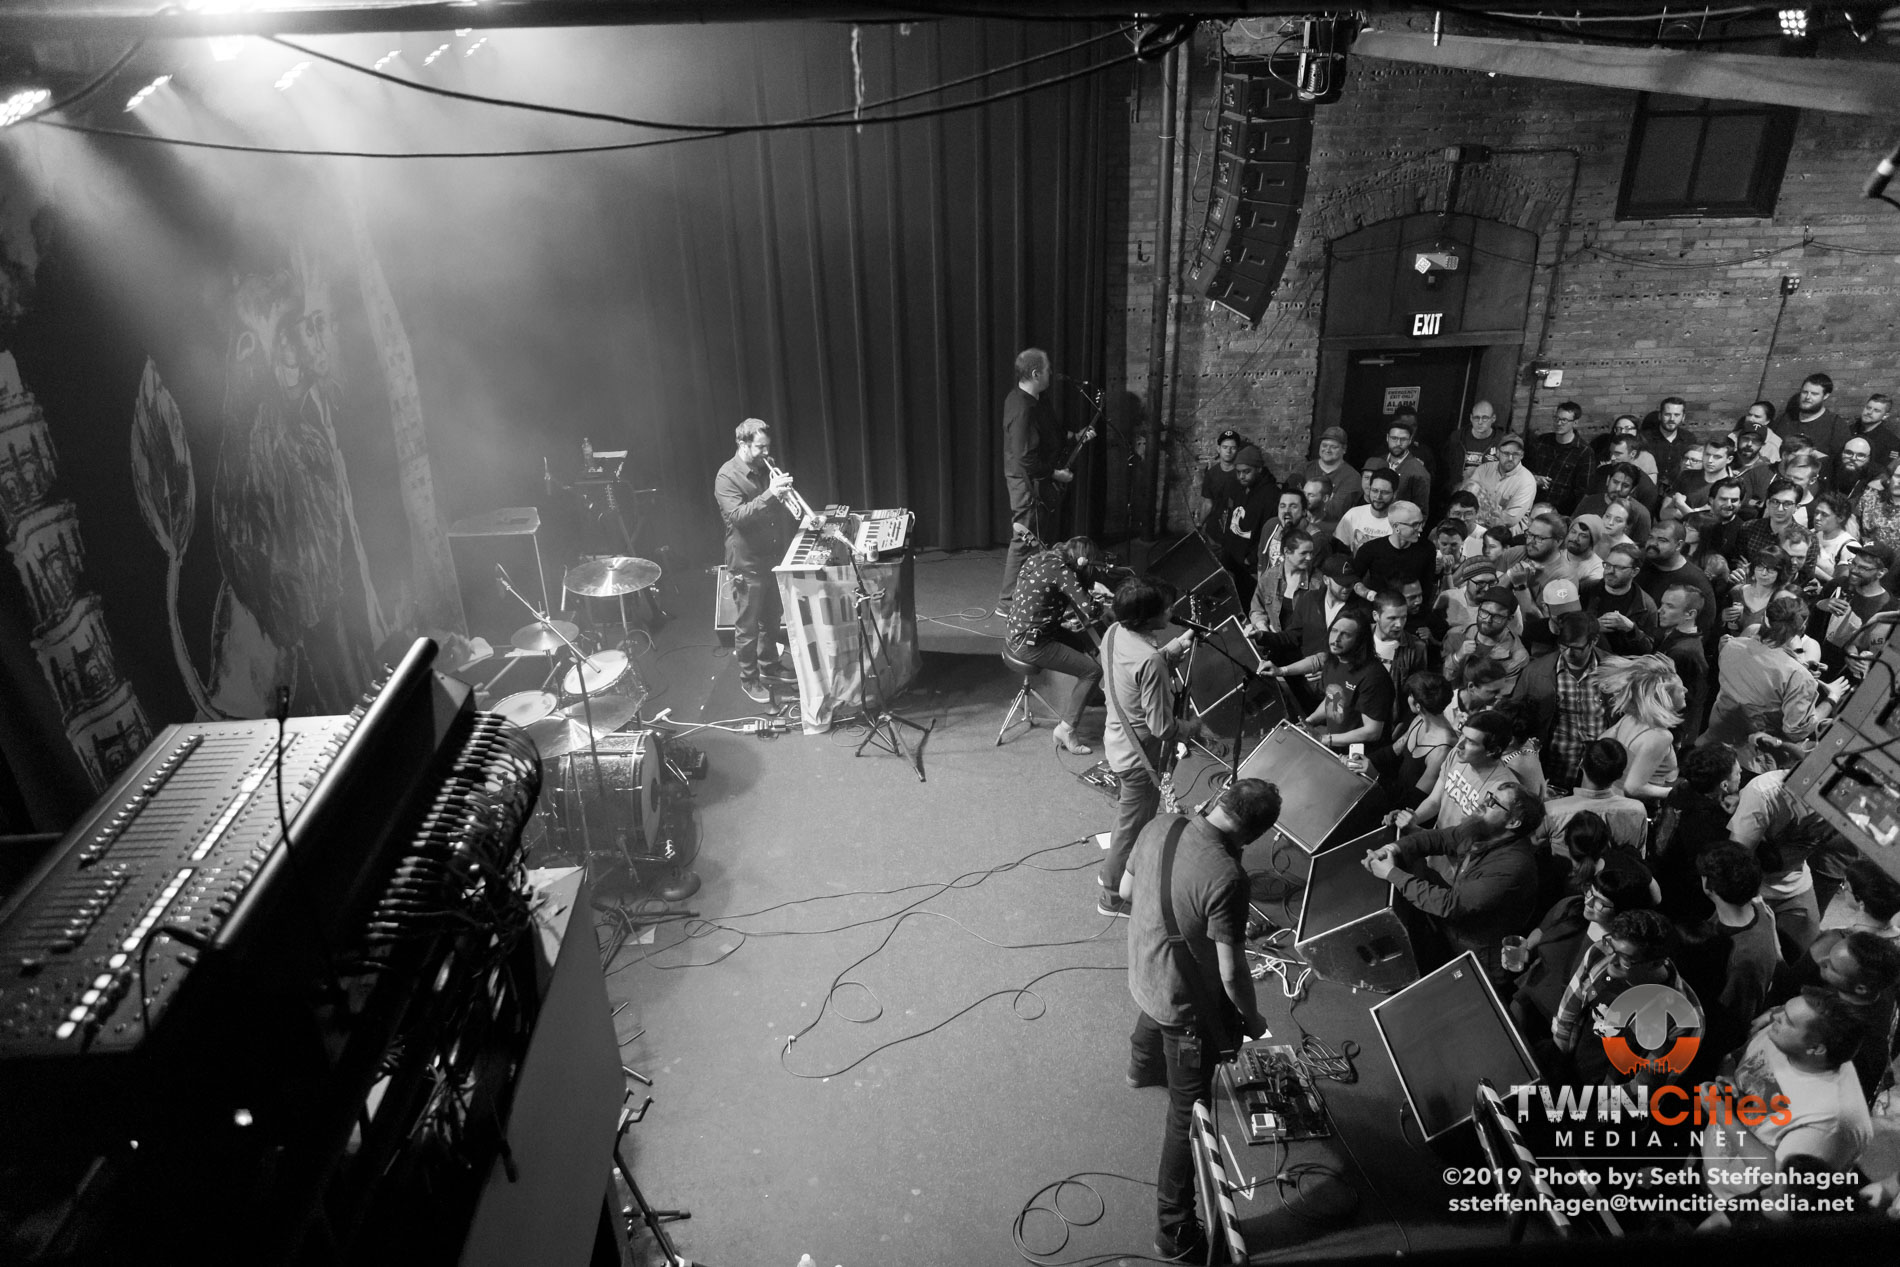 May 4, 2019 - Minneapolis, Minnesota, United States - Cursive live in concert at the Fine Line along with mewithoutYou and The Appleseed Cast as the openers.

(Photo by Seth Steffenhagen/Steffenhagen Photography)